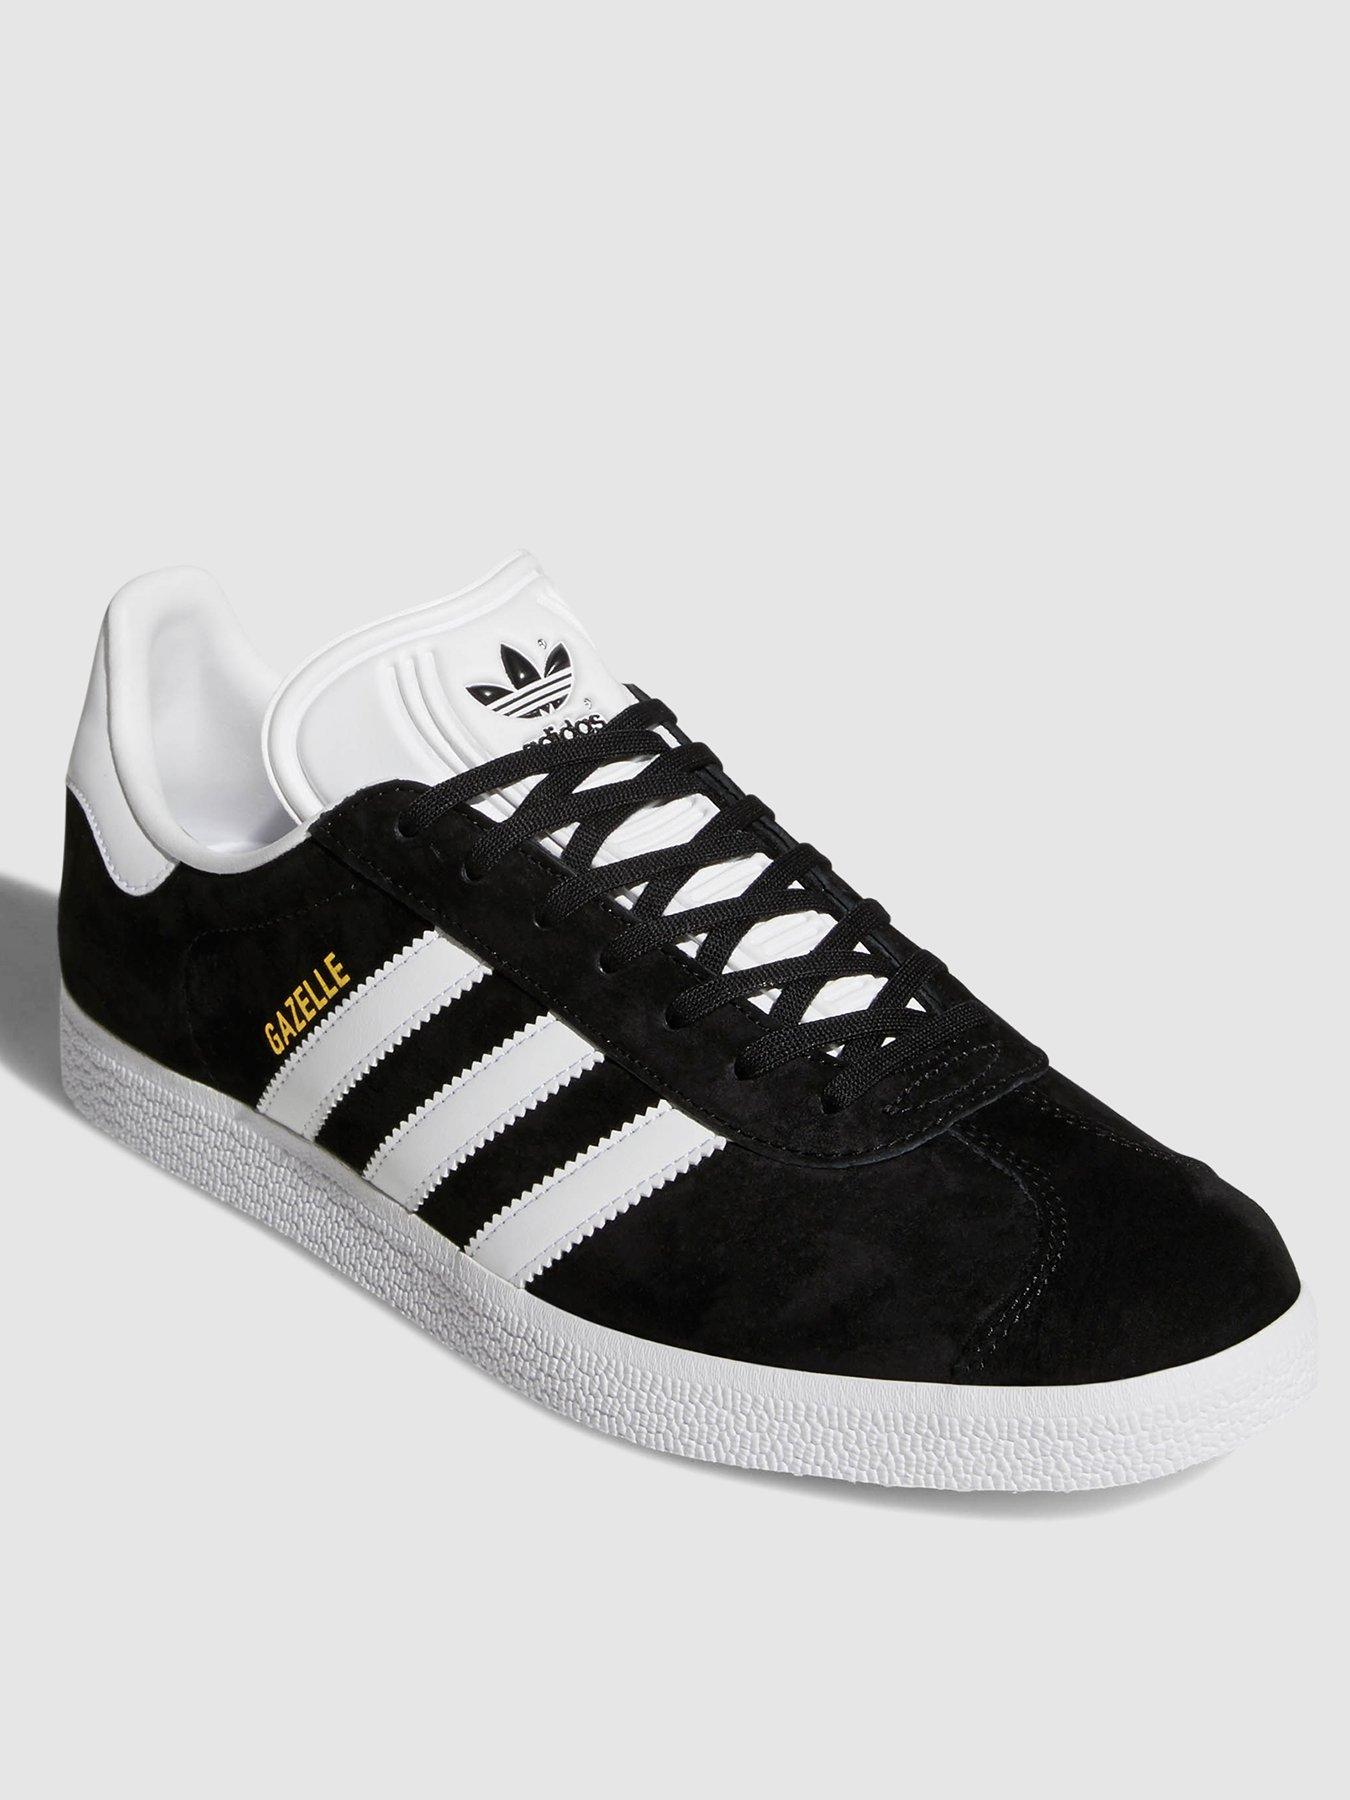 mens adidas trainers